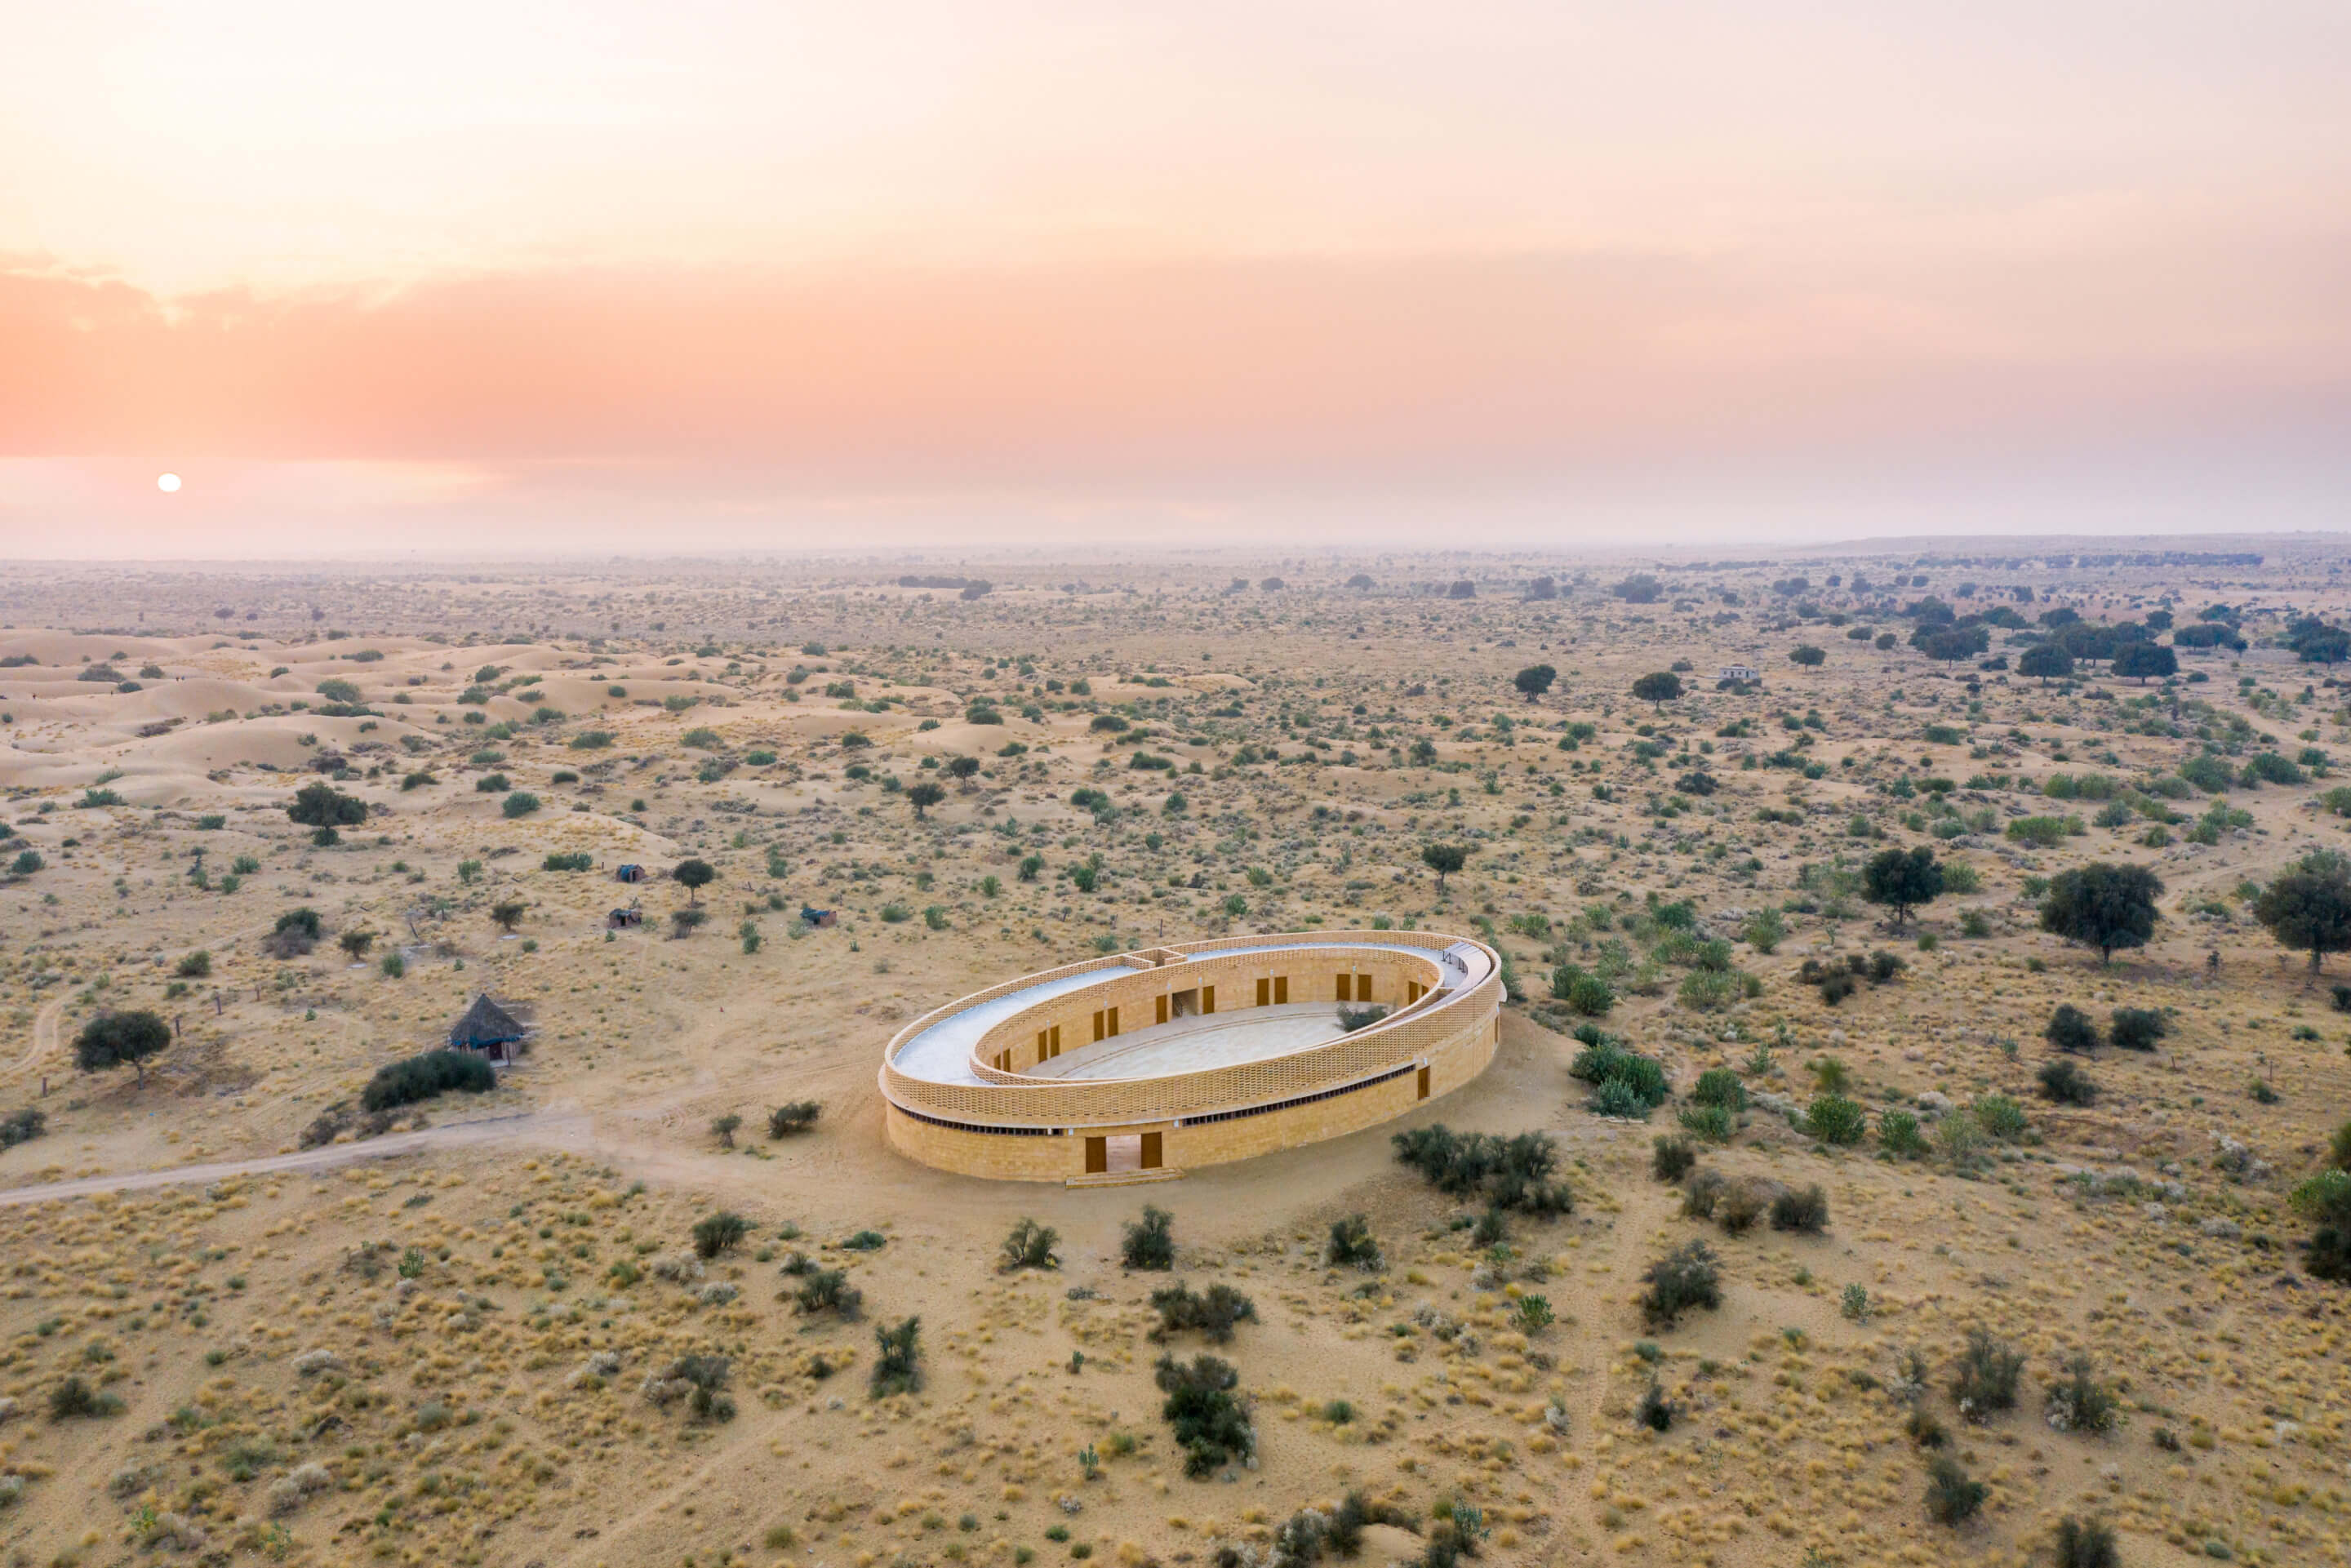 a circular building surrounded by a vast, empty desert landscape